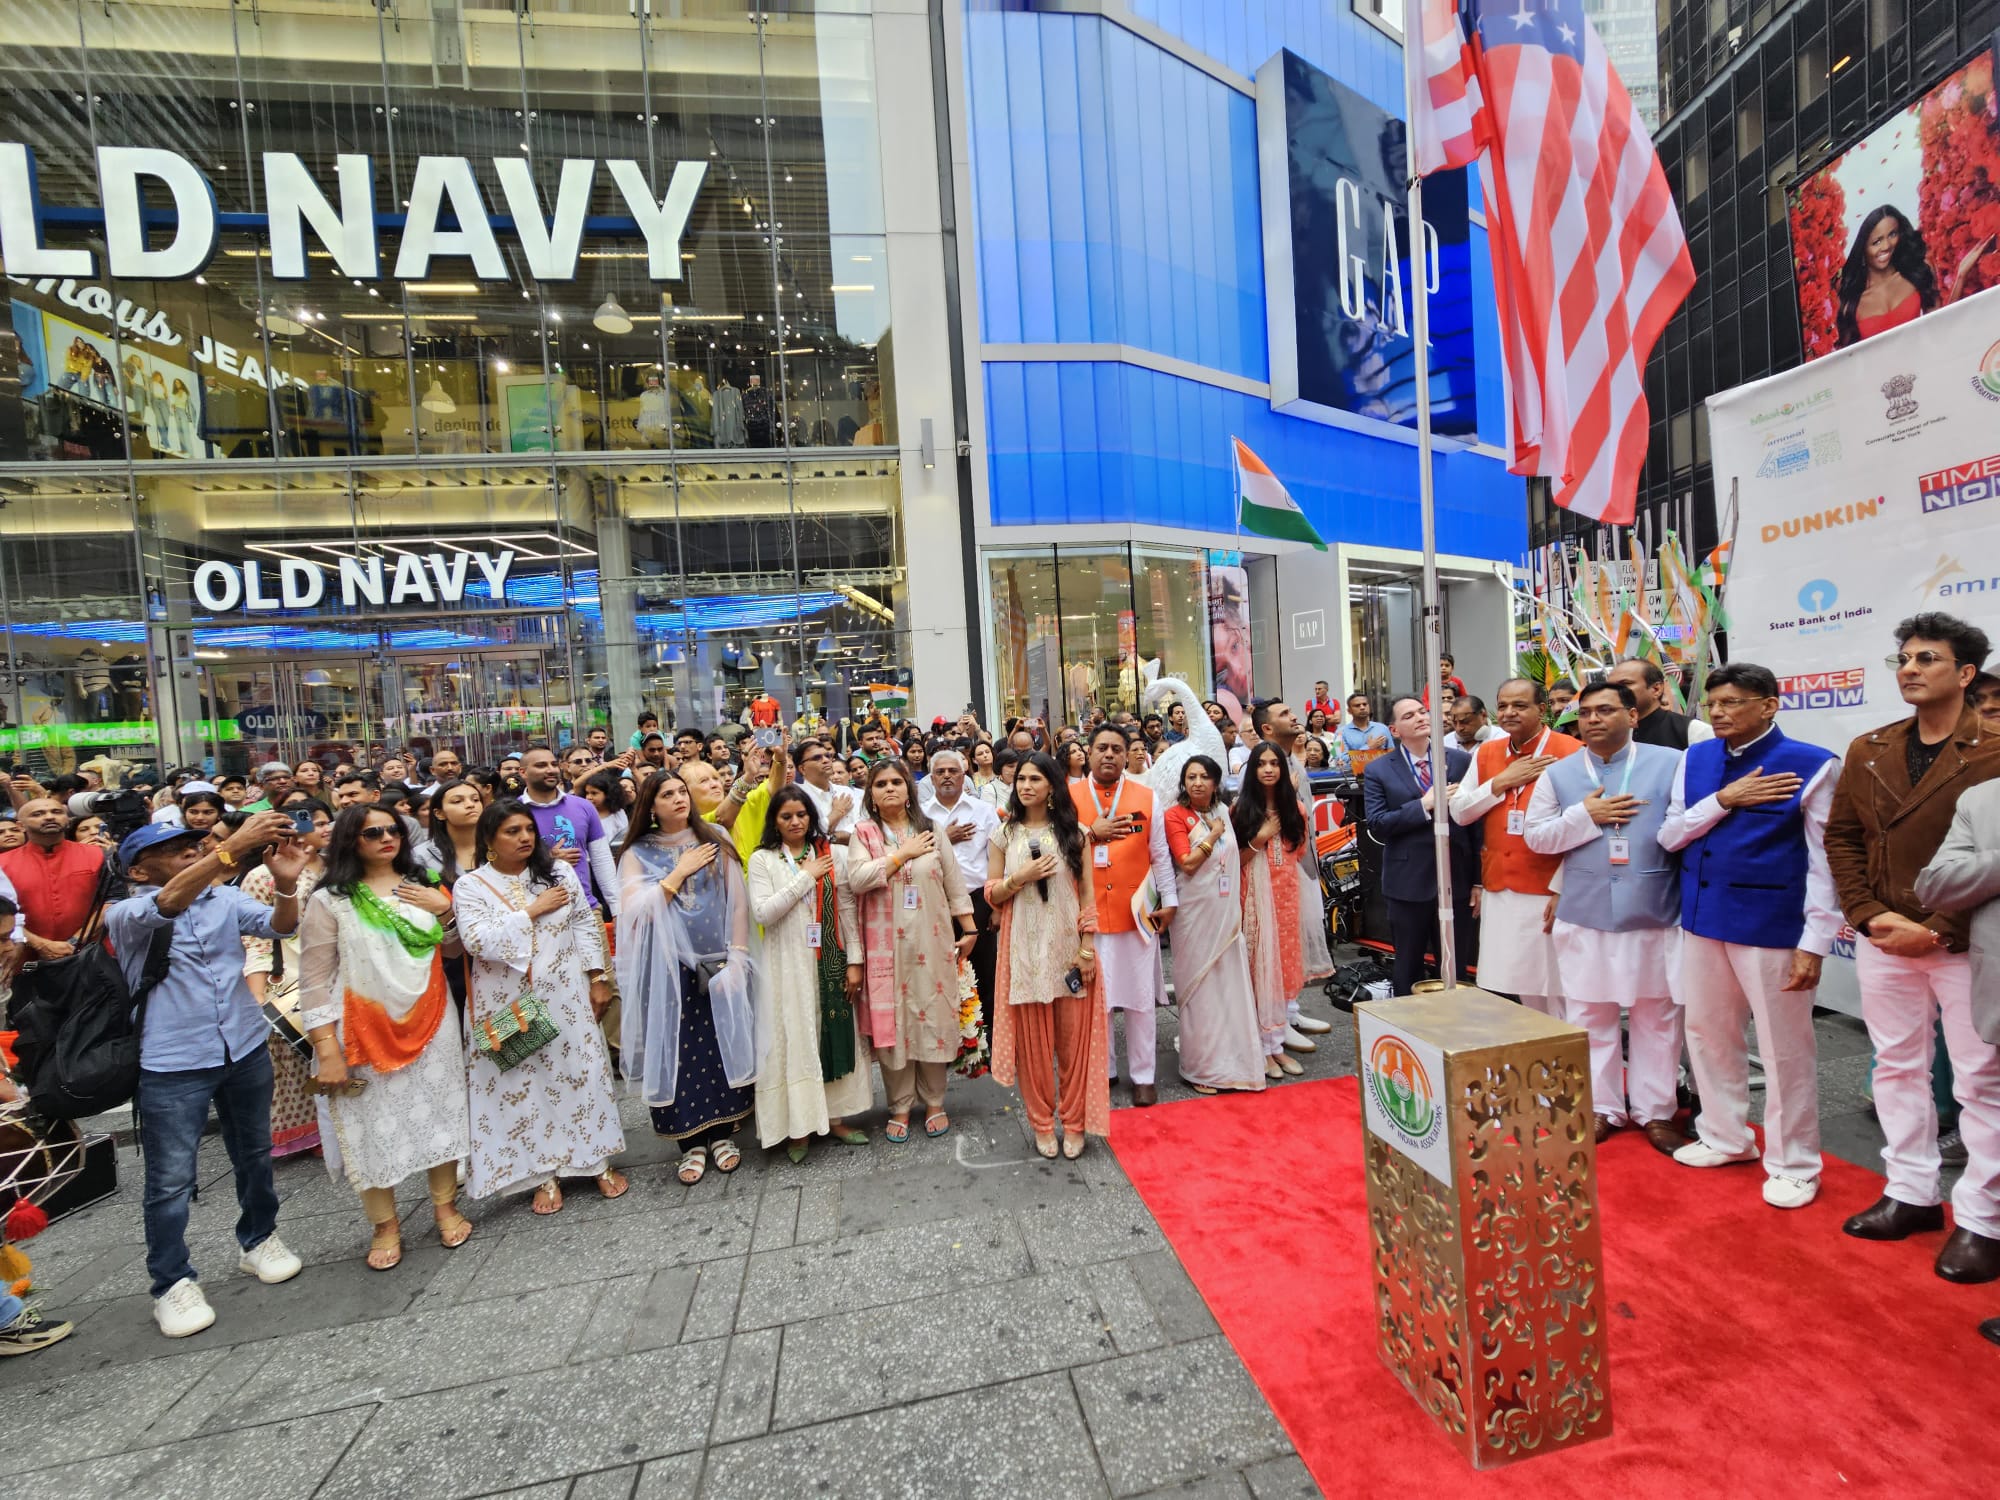 77th Independence Day of India: FIA organizes Indian flag-hoisting at Times Square